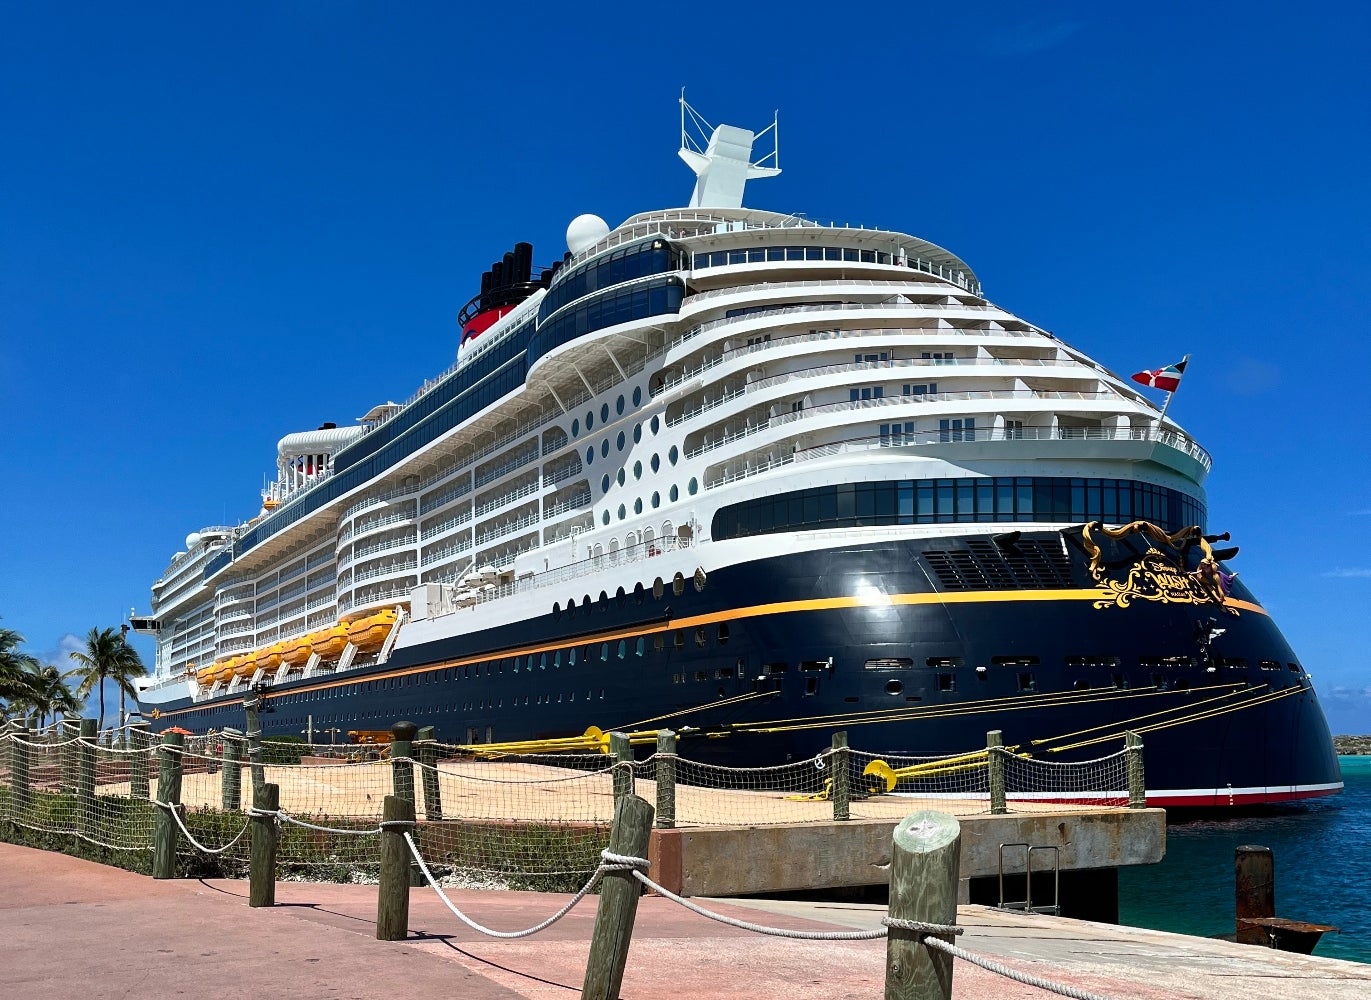 Disney's Newest Cruise Ship, The Wish, Literally Has Something For Everyone